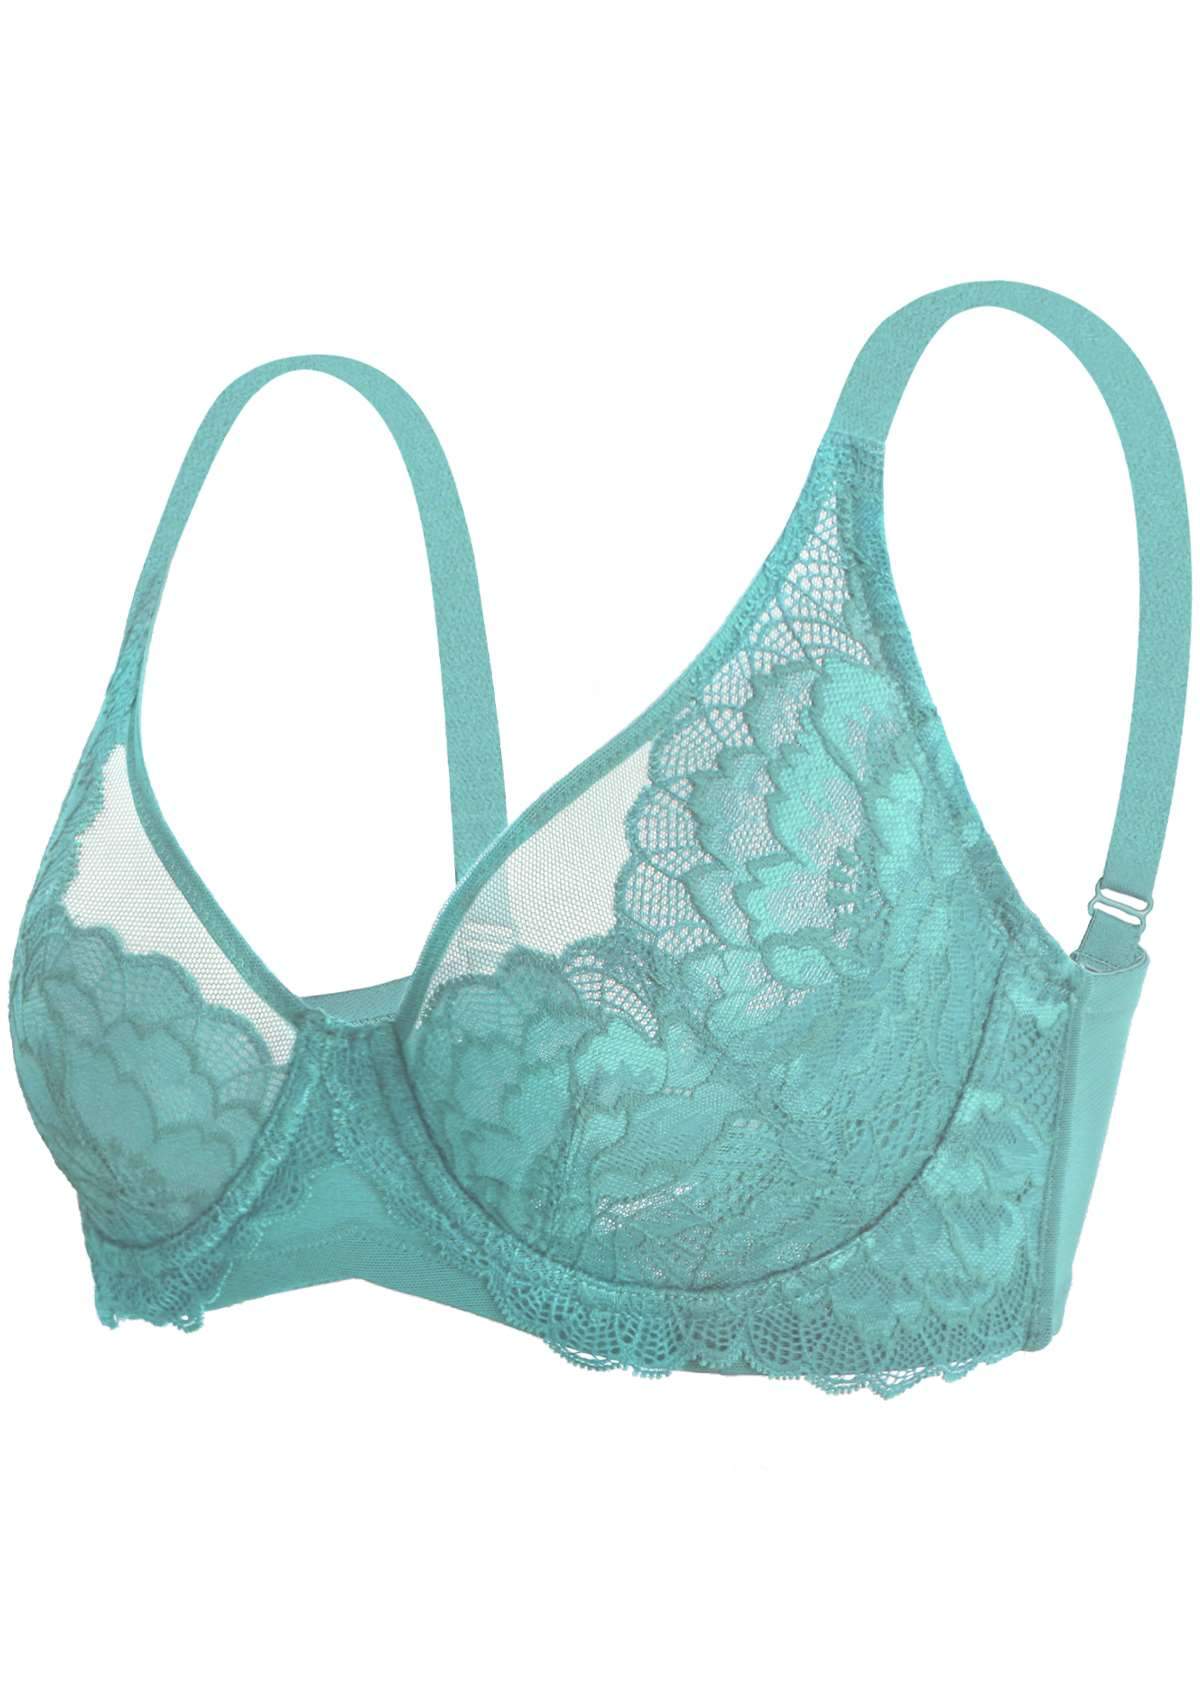 HSIA Peony Lace Unlined Supportive Underwire Bra - Green / 36 / D